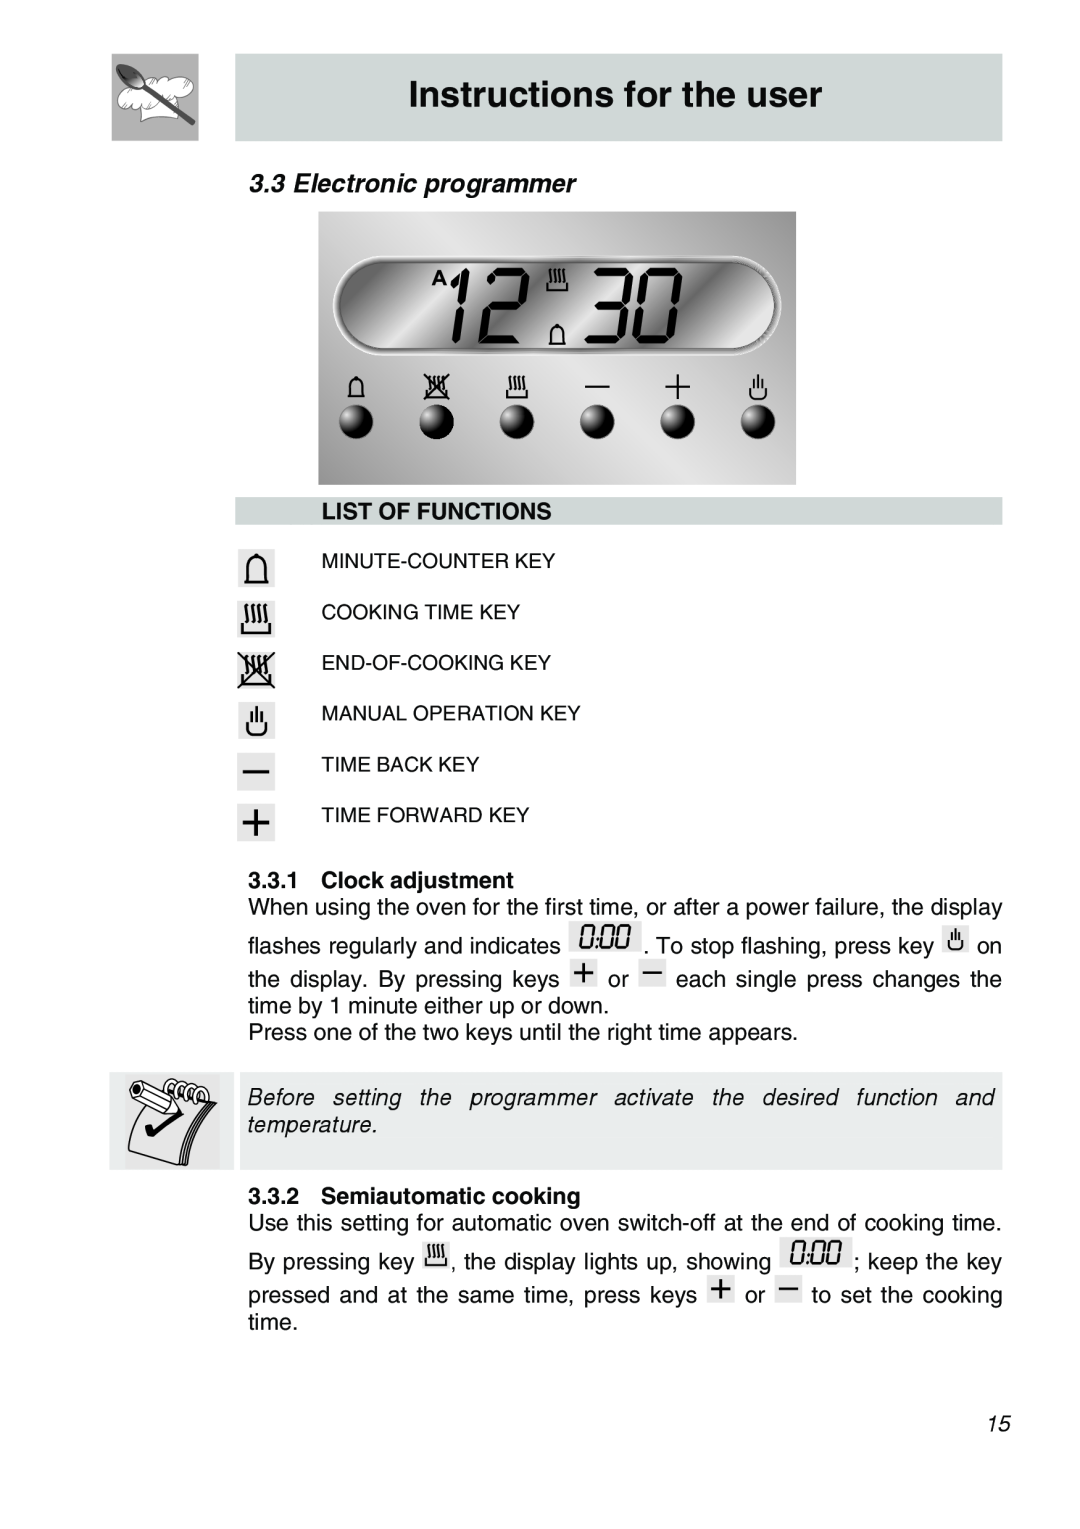 Smeg SA705X-7 Electronic programmer, Instructions for the user, List Of Functions, Clock adjustment, Semiautomatic cooking 